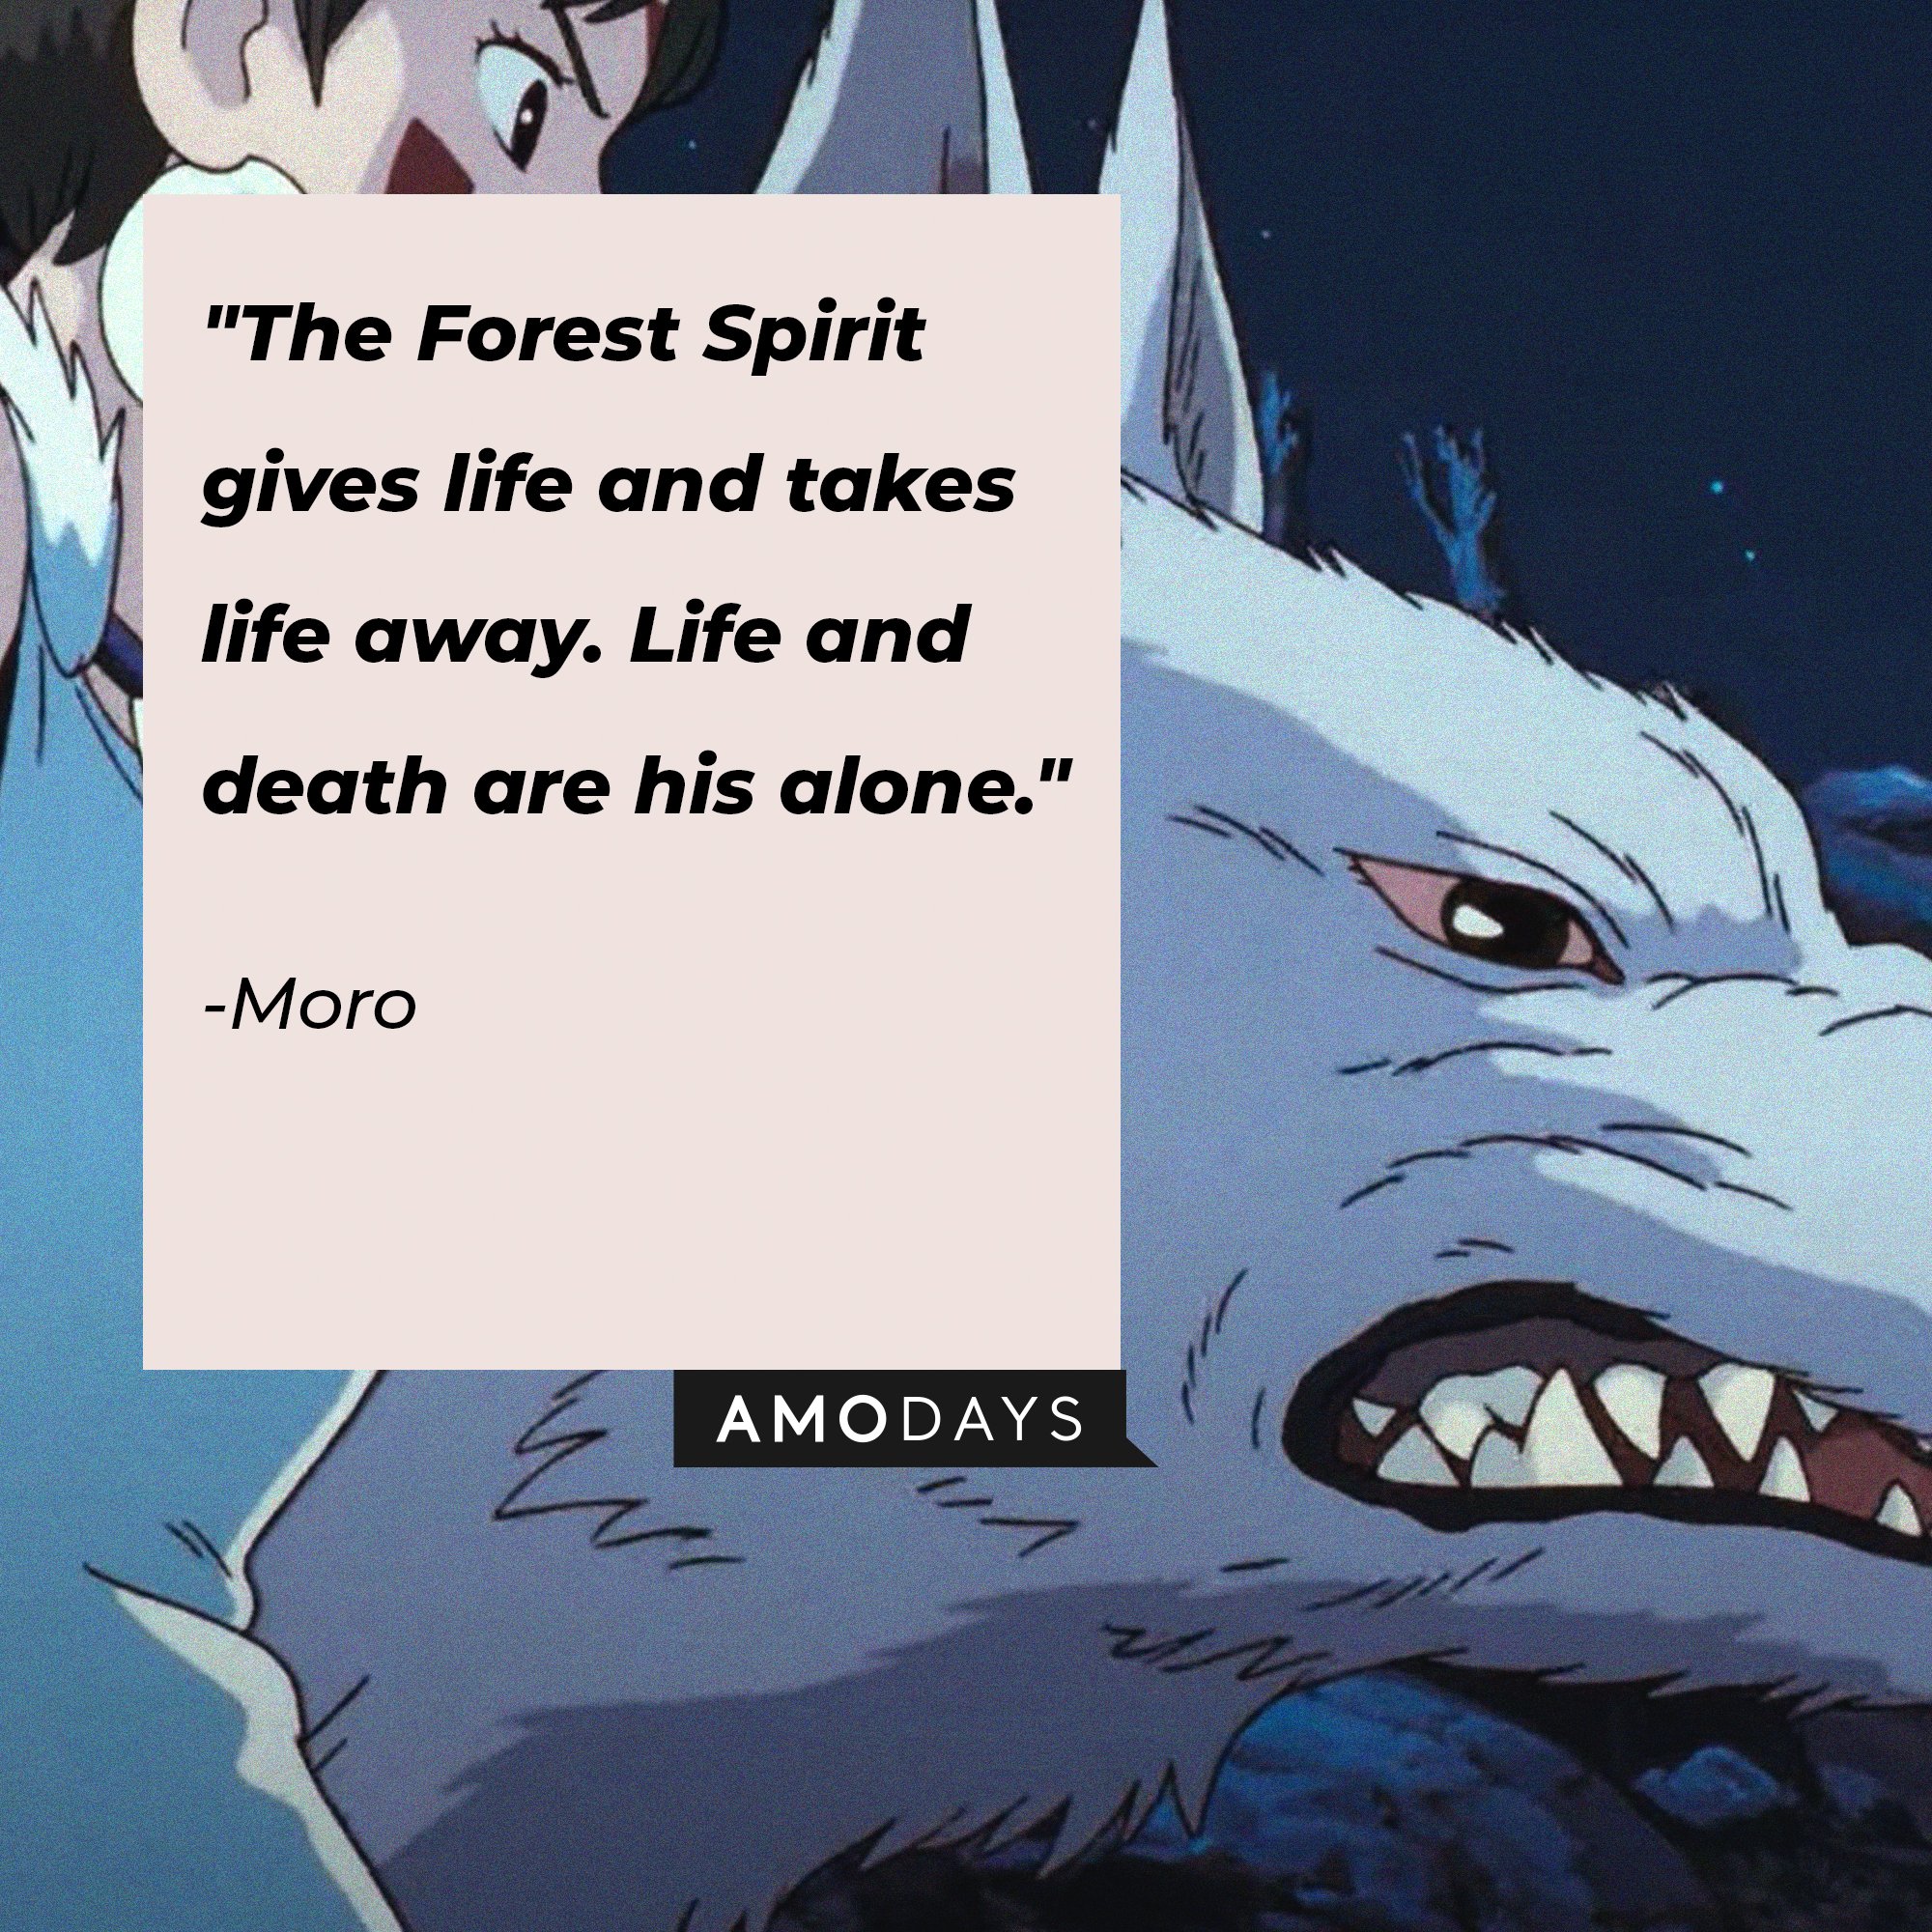 Moro’s quote: "The Forest Spirit gives life and takes life away. Life and death are his alone." | Image: AmoDays